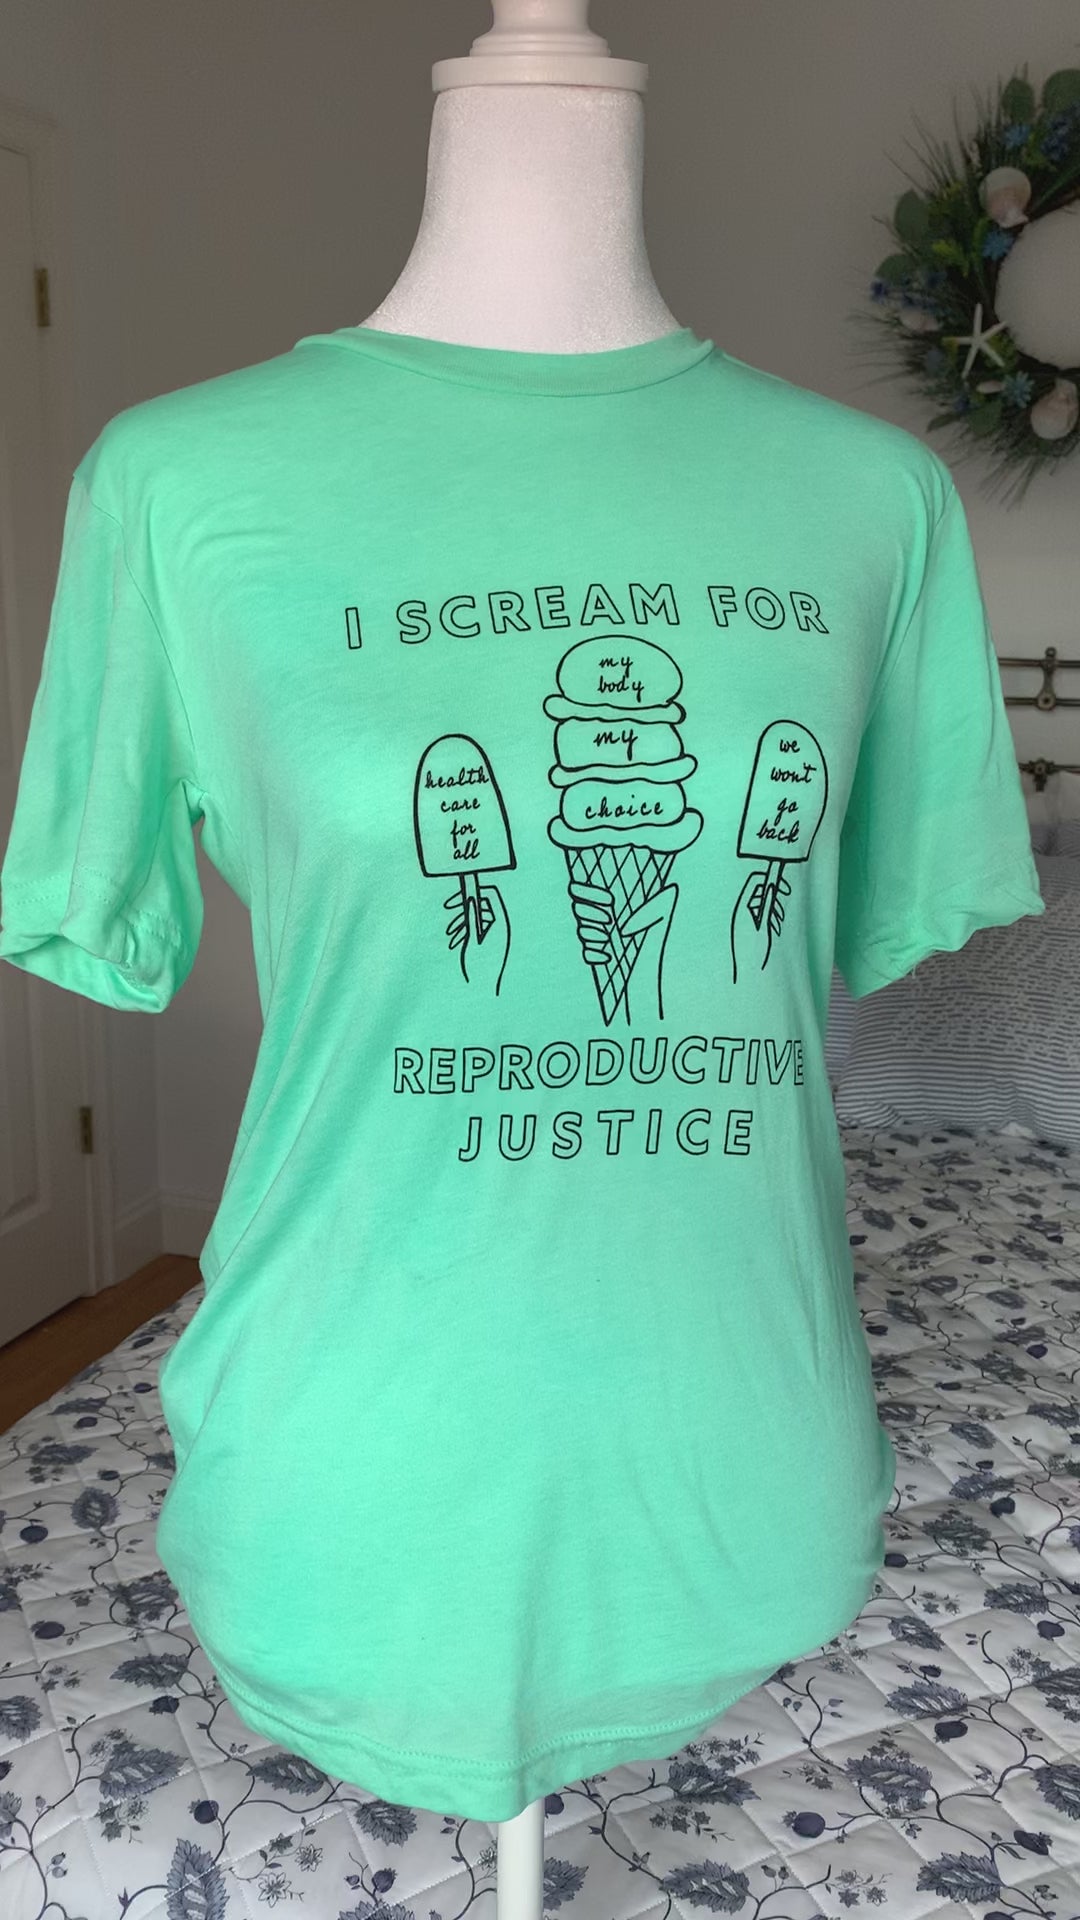 A mint green t-shirt that reads "I scream for reproductive justice" hangs on a manikin